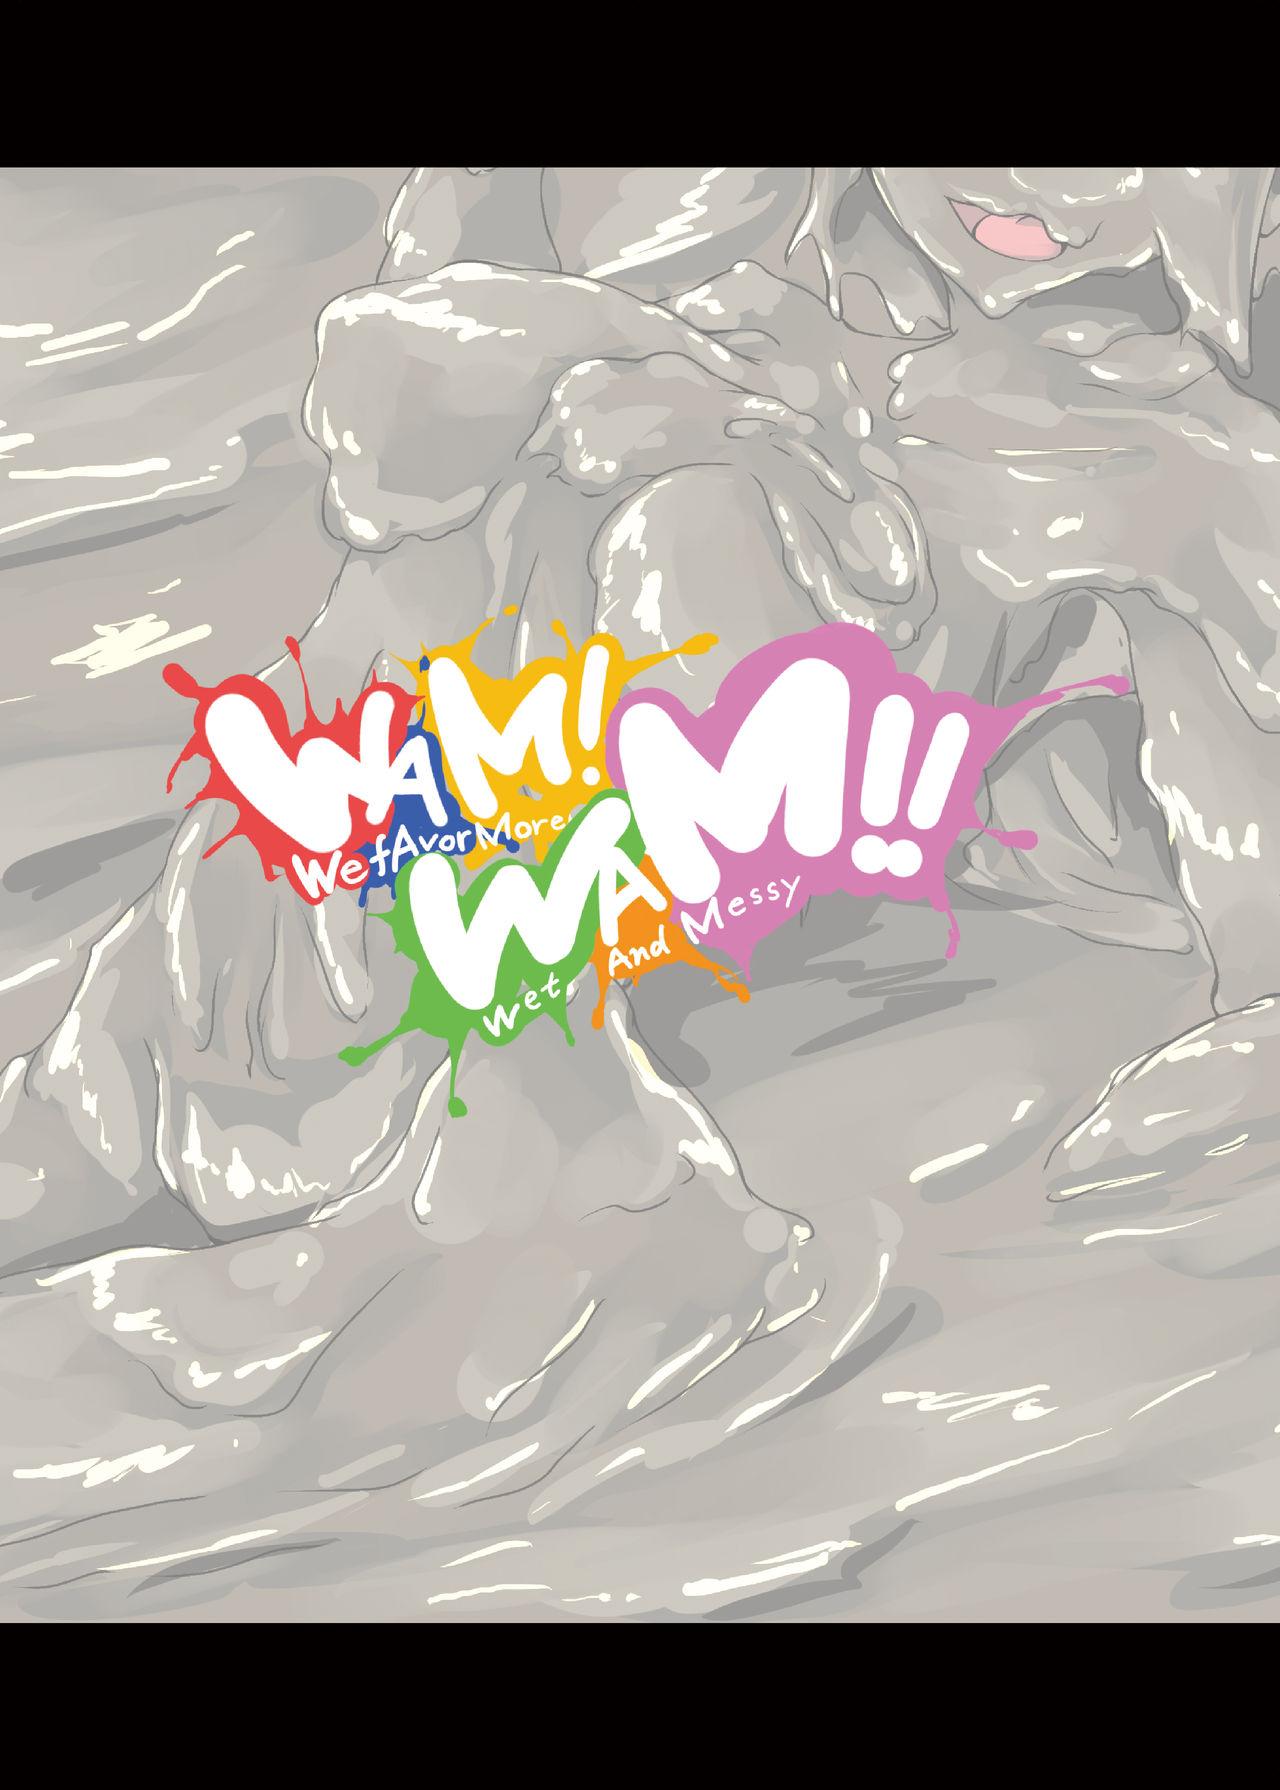 WAM!WAM!! - We fAvor More Wet And Messy 43